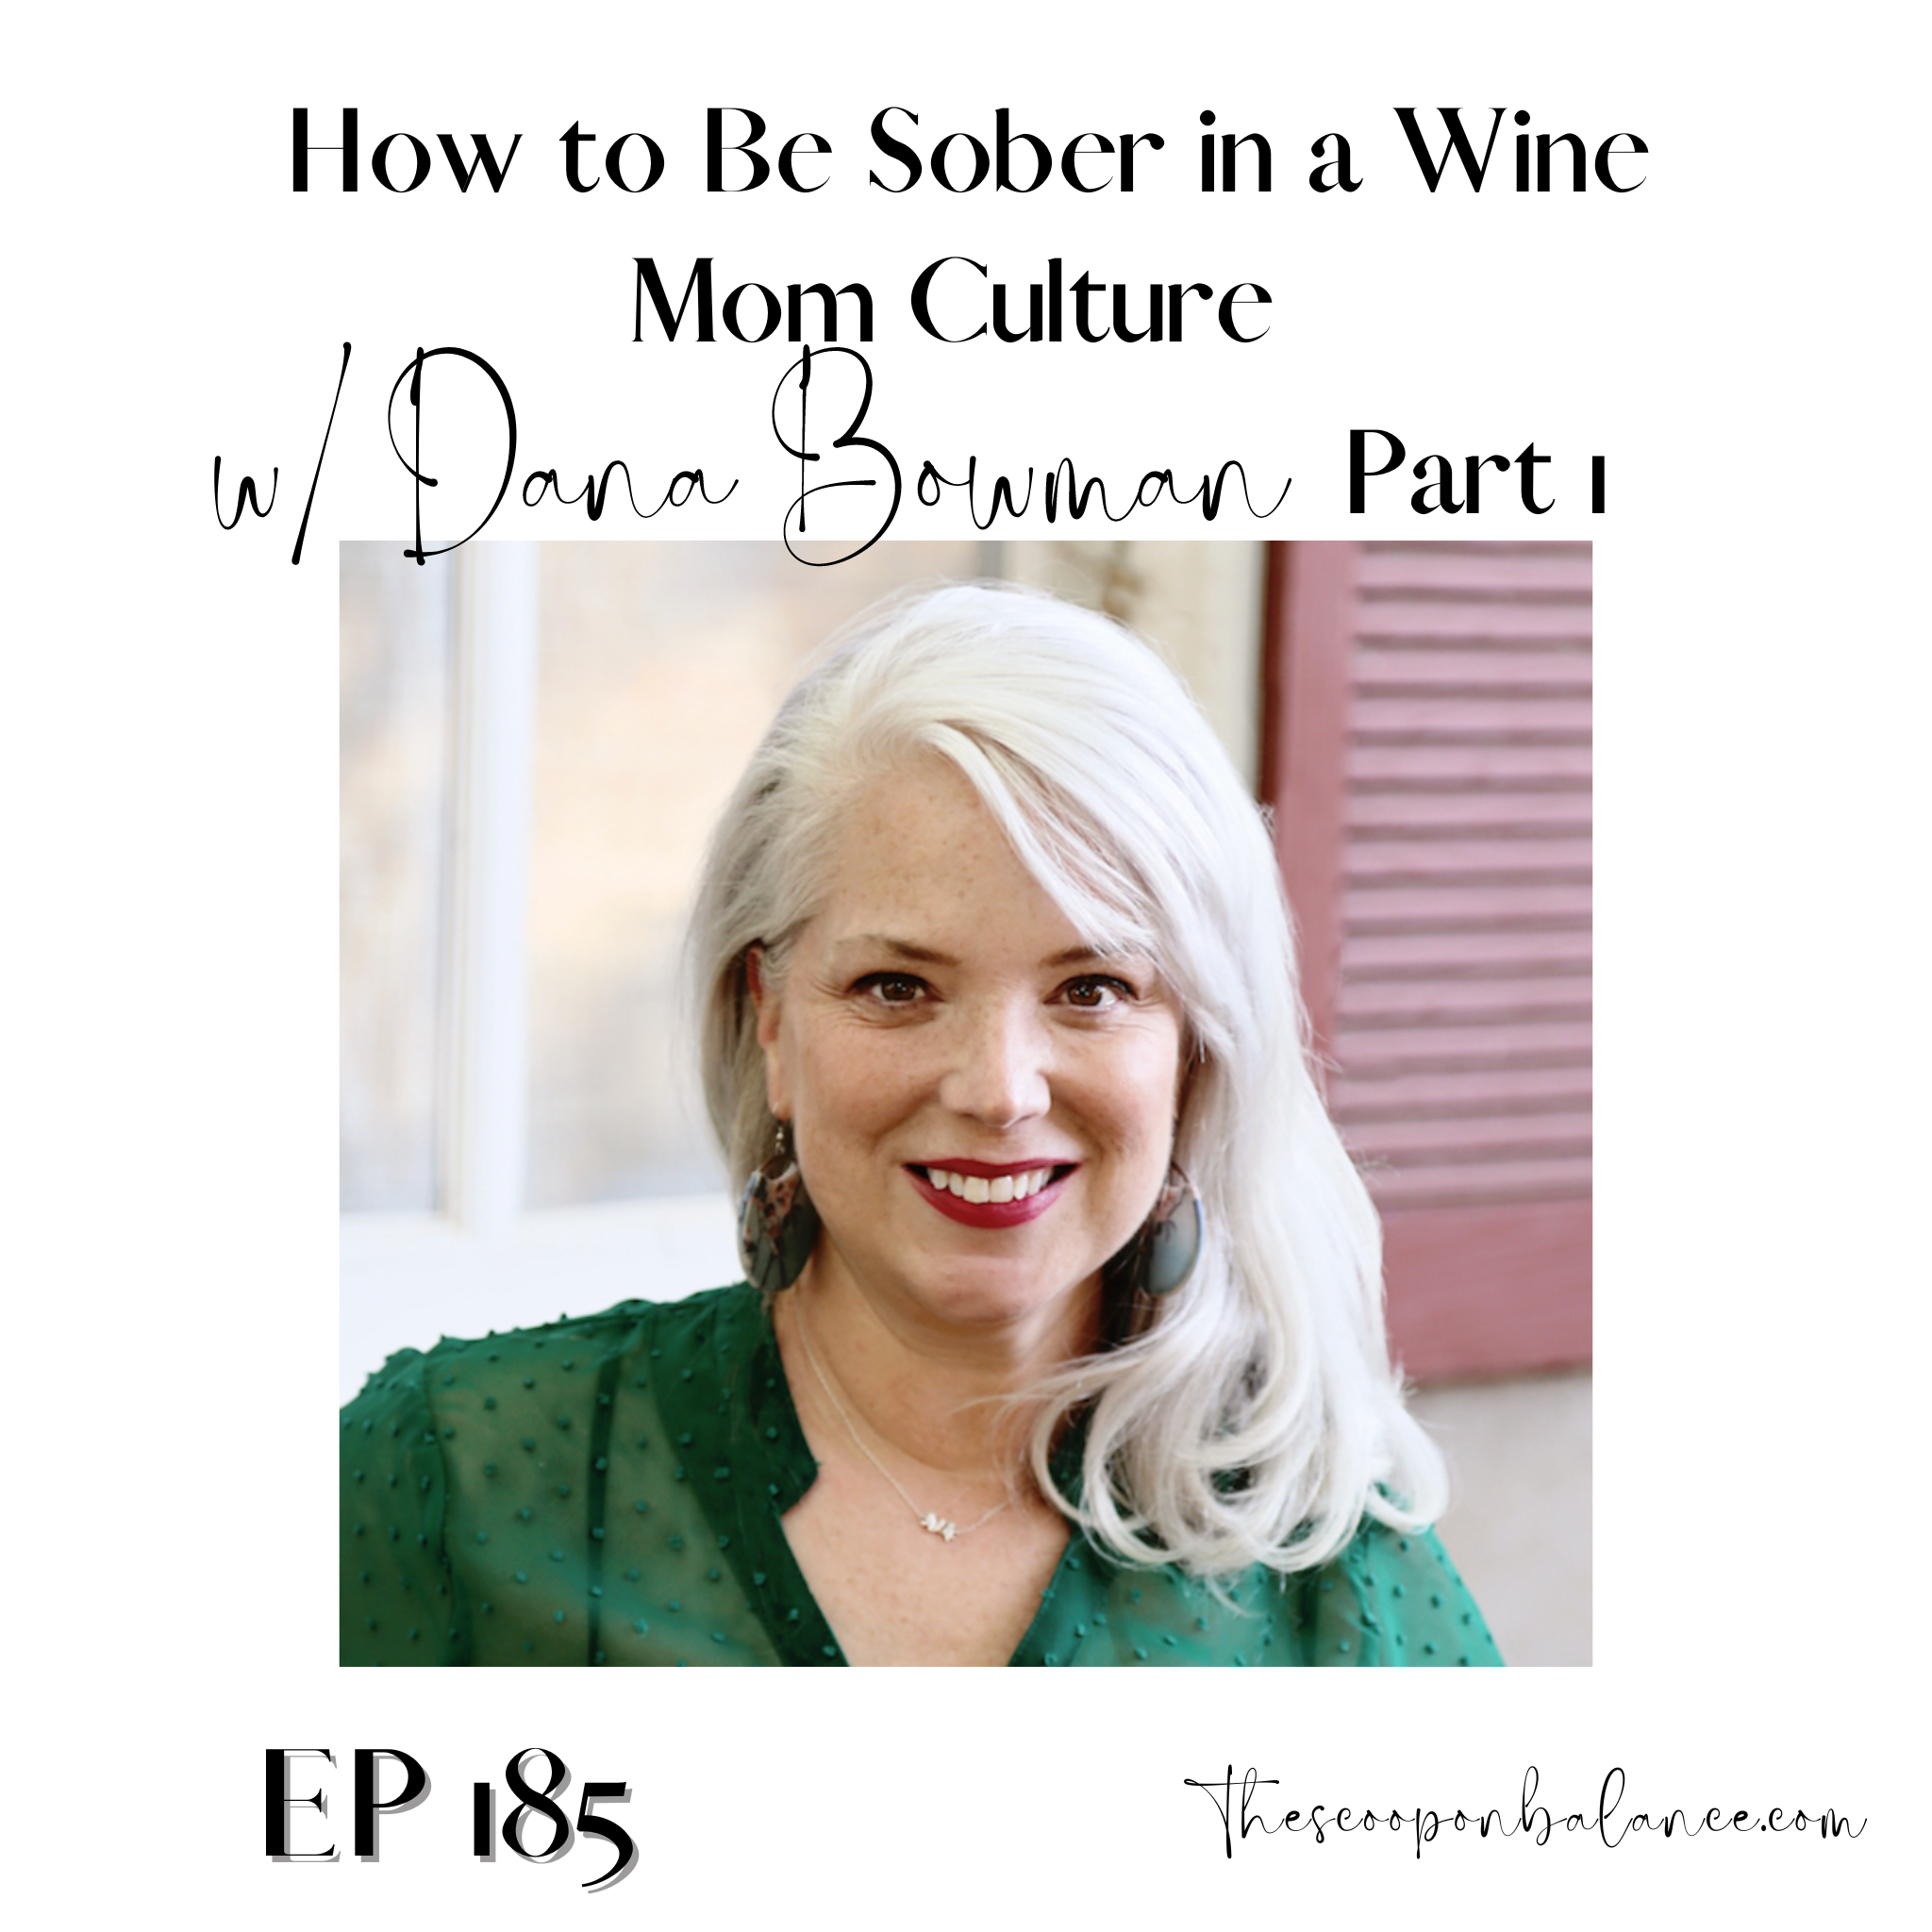 Ep 186: How to Be Sober in a Wine Mom Culture with Dana Bowman, Part 2